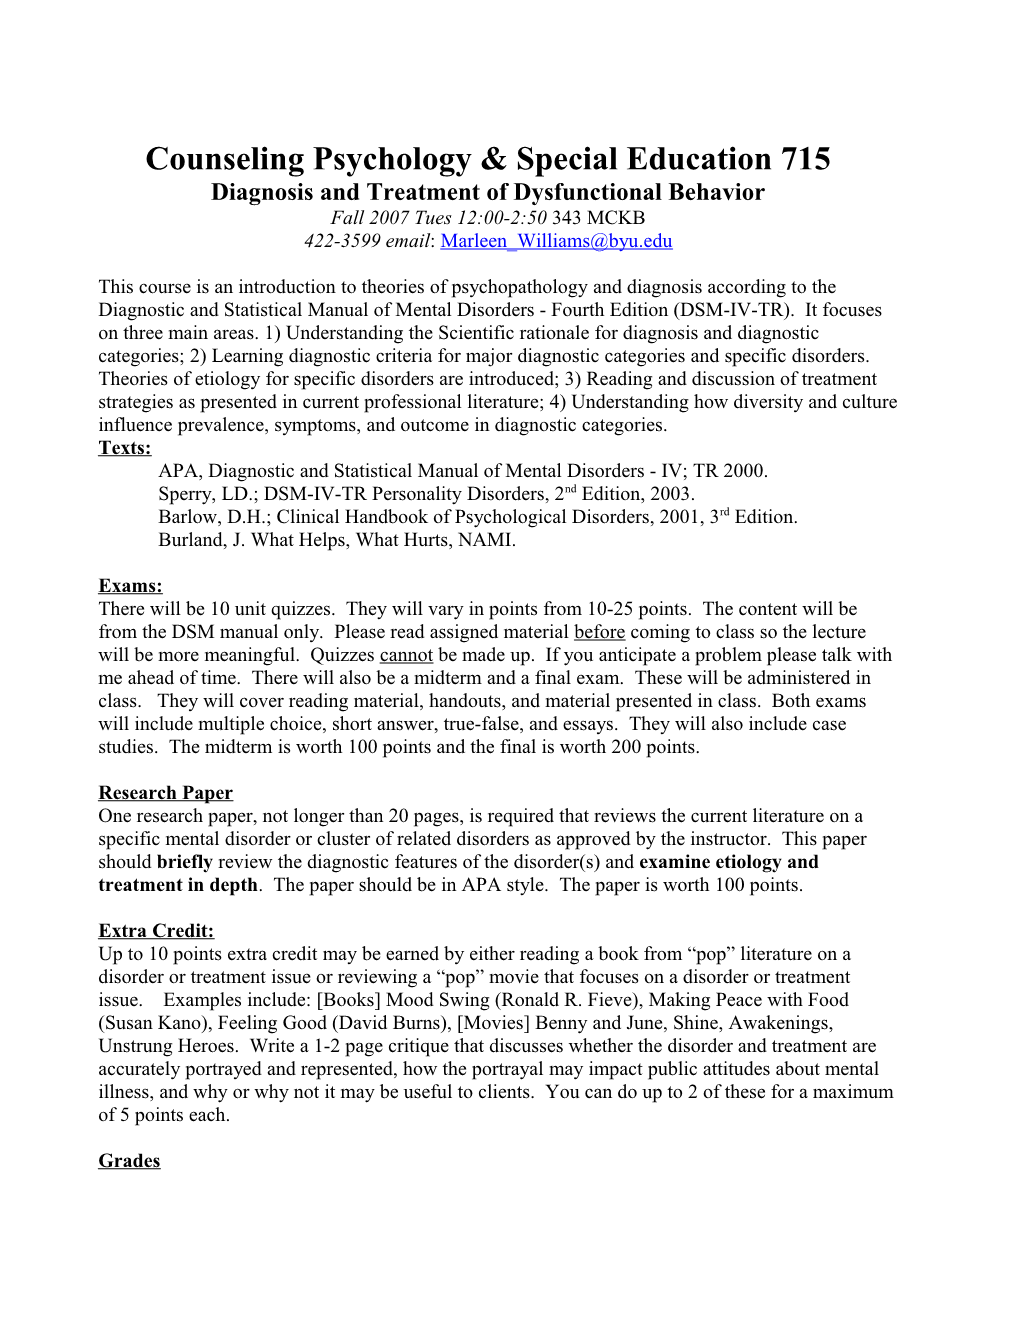 Counseling Psychology & Special Education 715